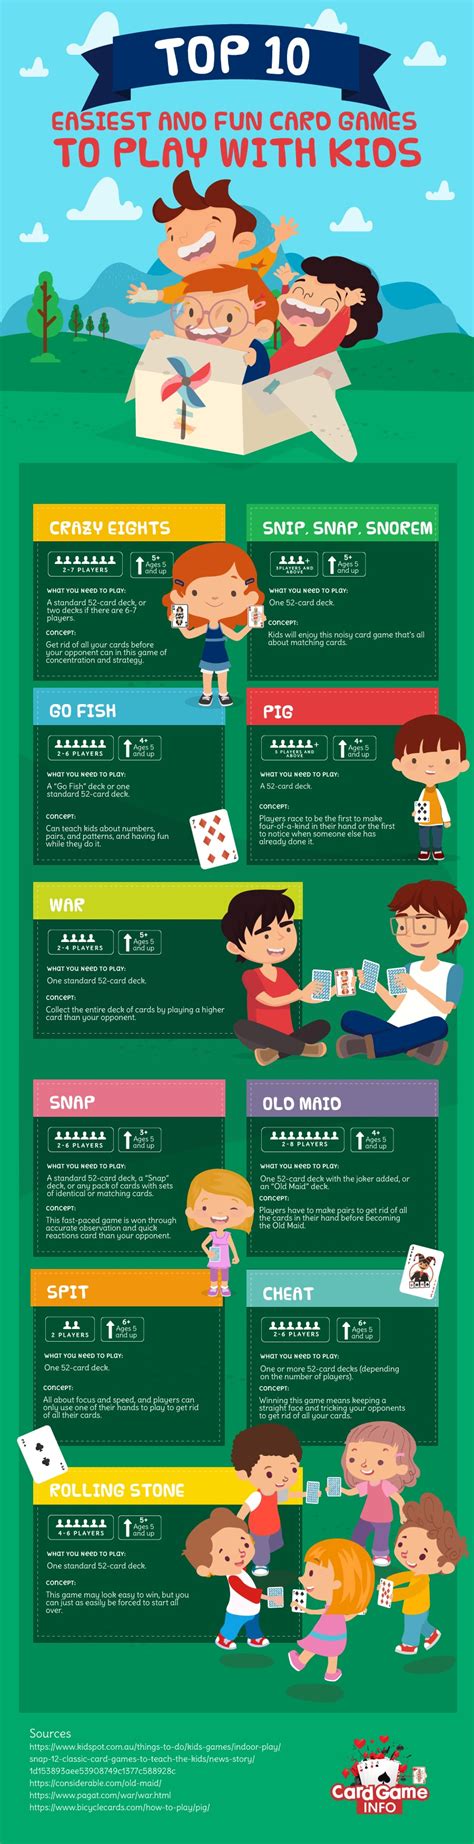 Top 10 Easiest And Fun Card Games To Play With Kids Card Game Info